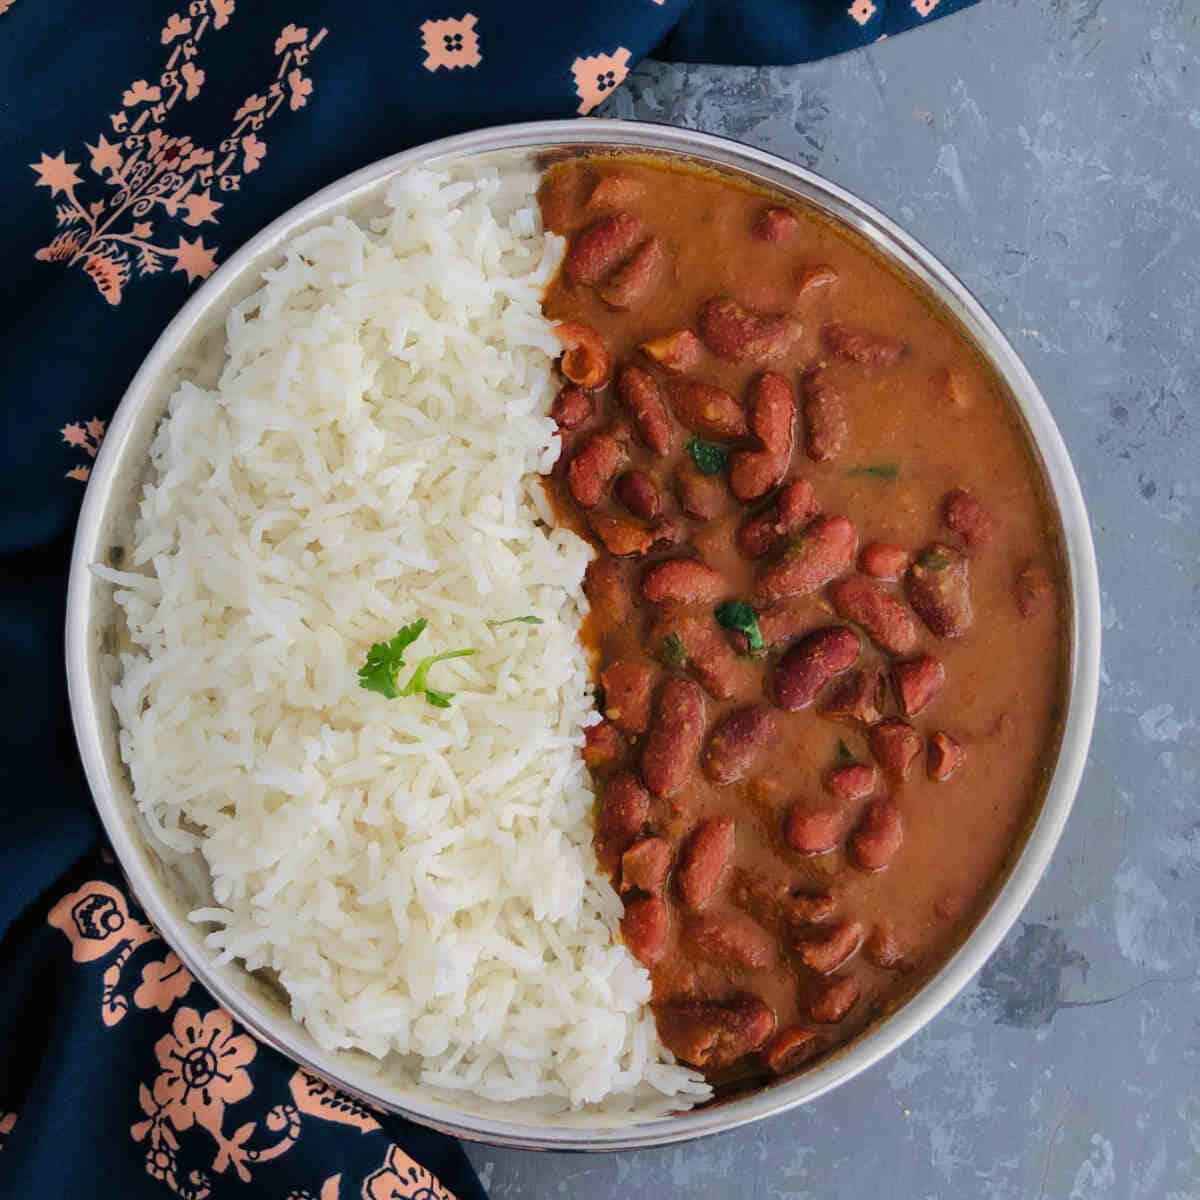 rajma served with steamed rice